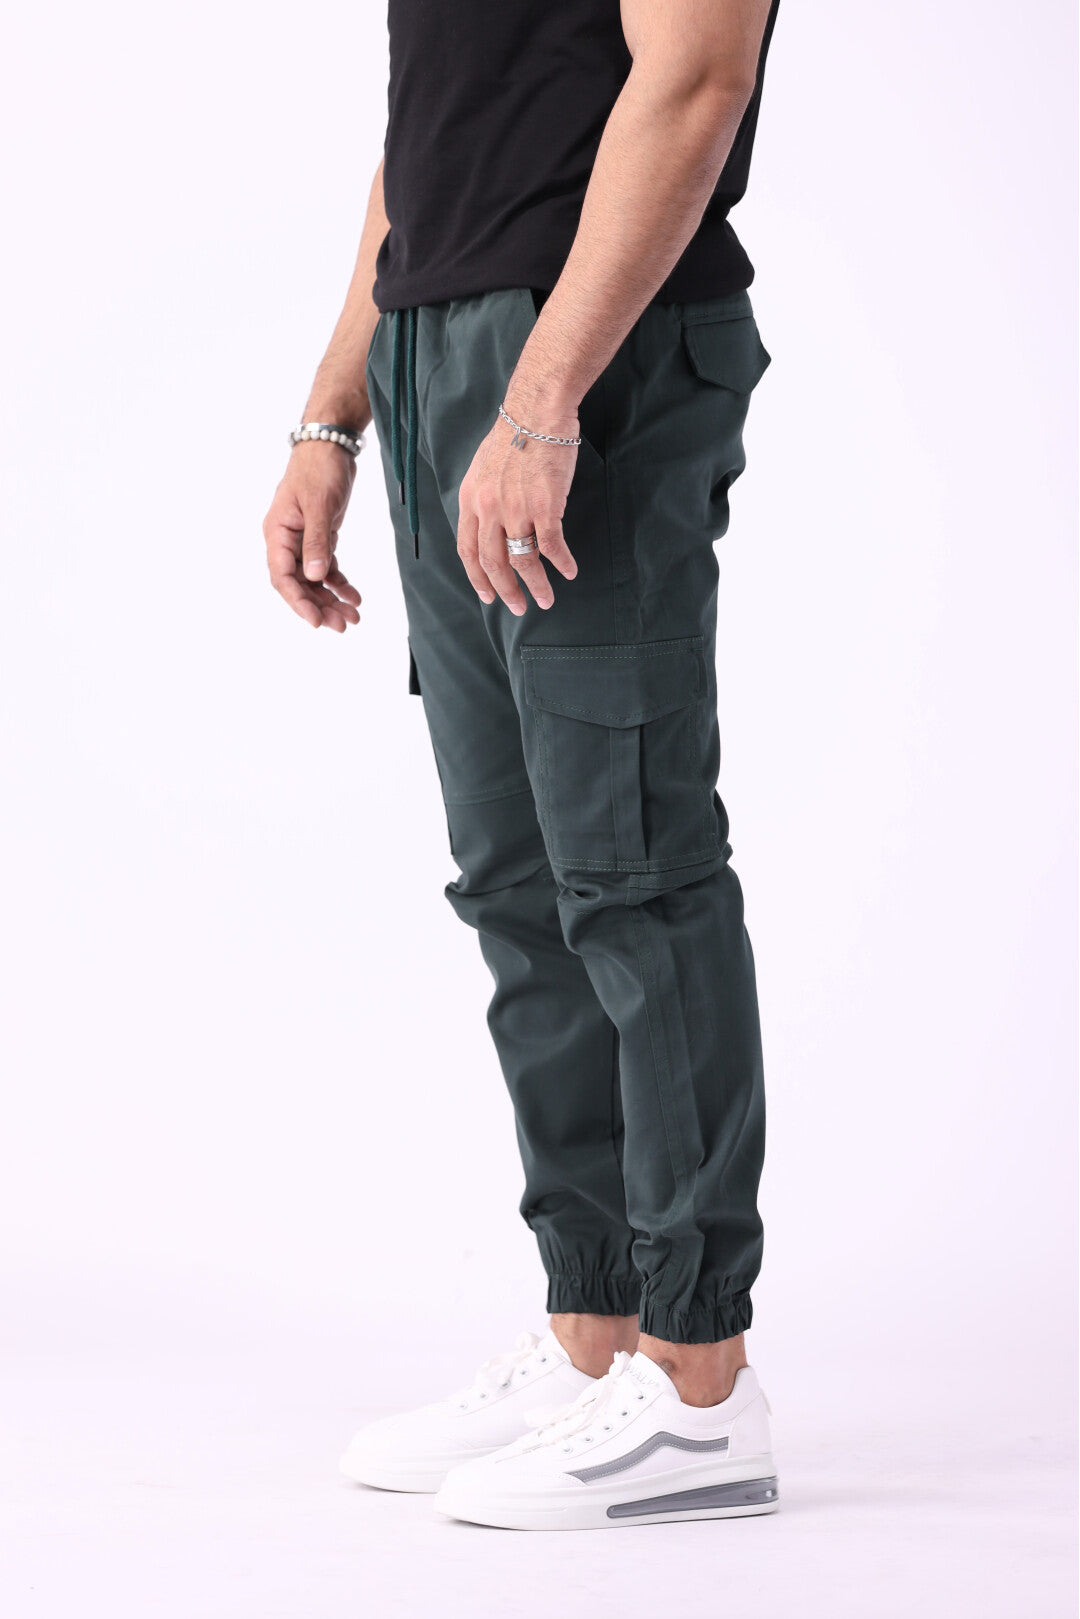 Cargo Six Pocket Trousers for Men - Green 6 Pocket Cargo Pant